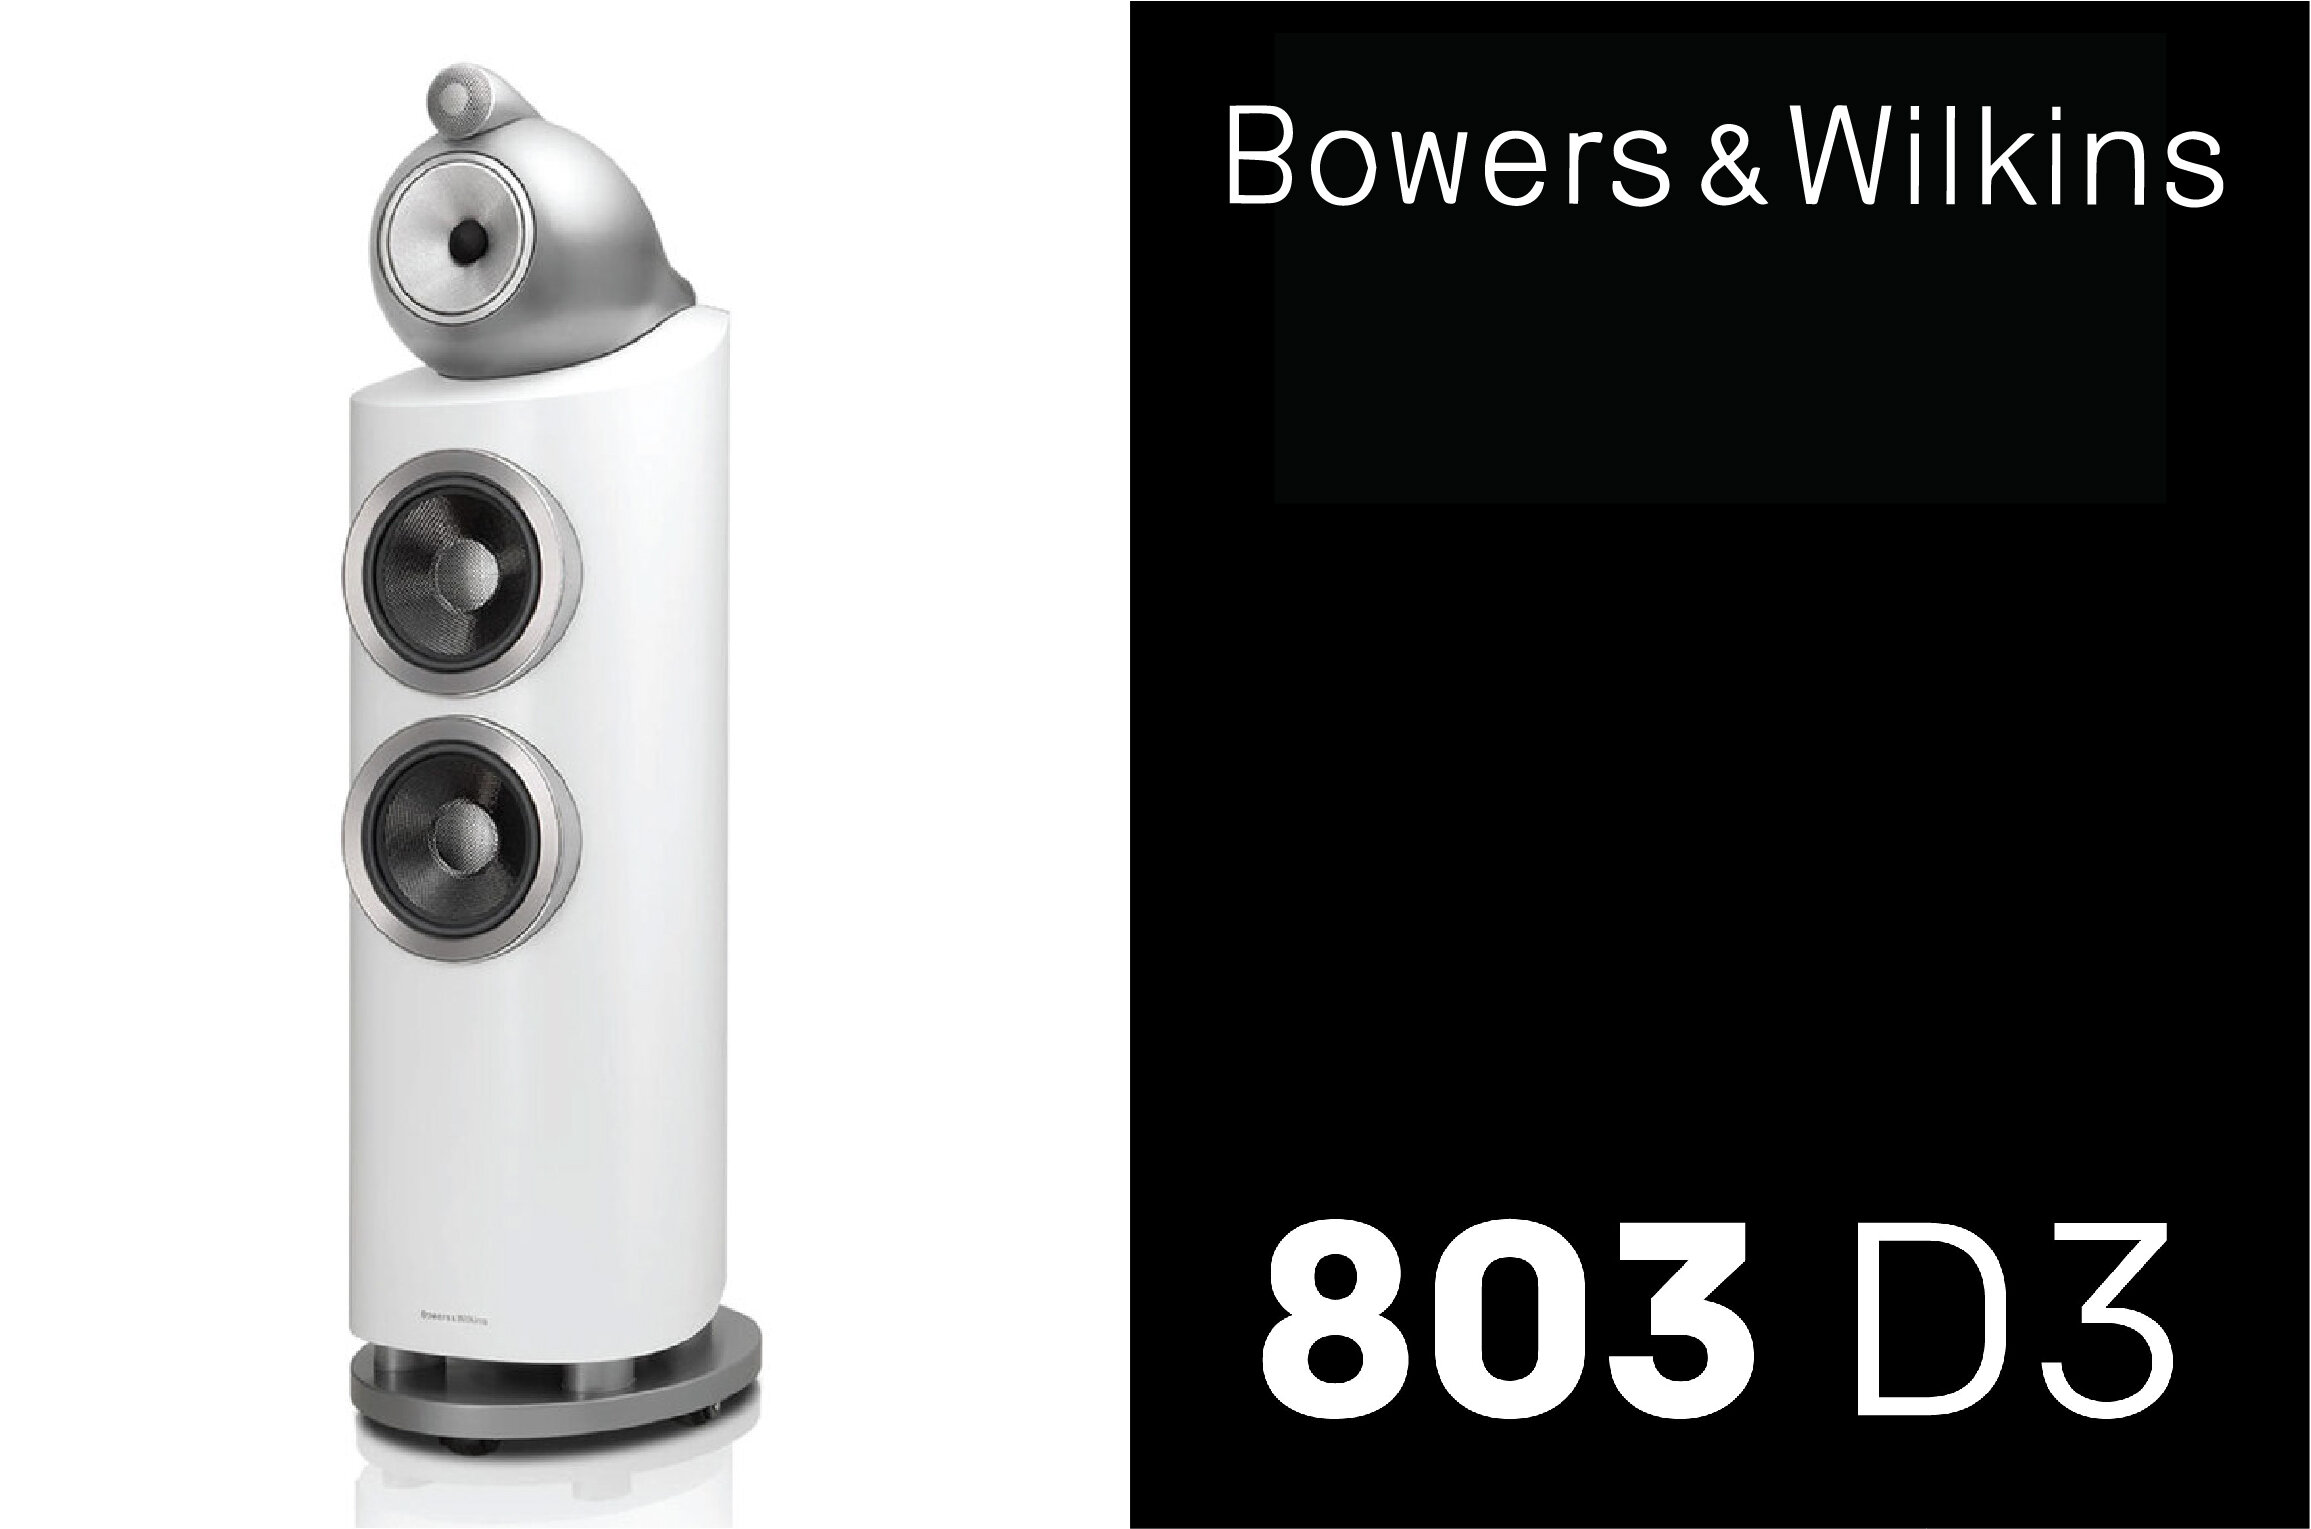 Bowers &amp; Wilkins 803 D3